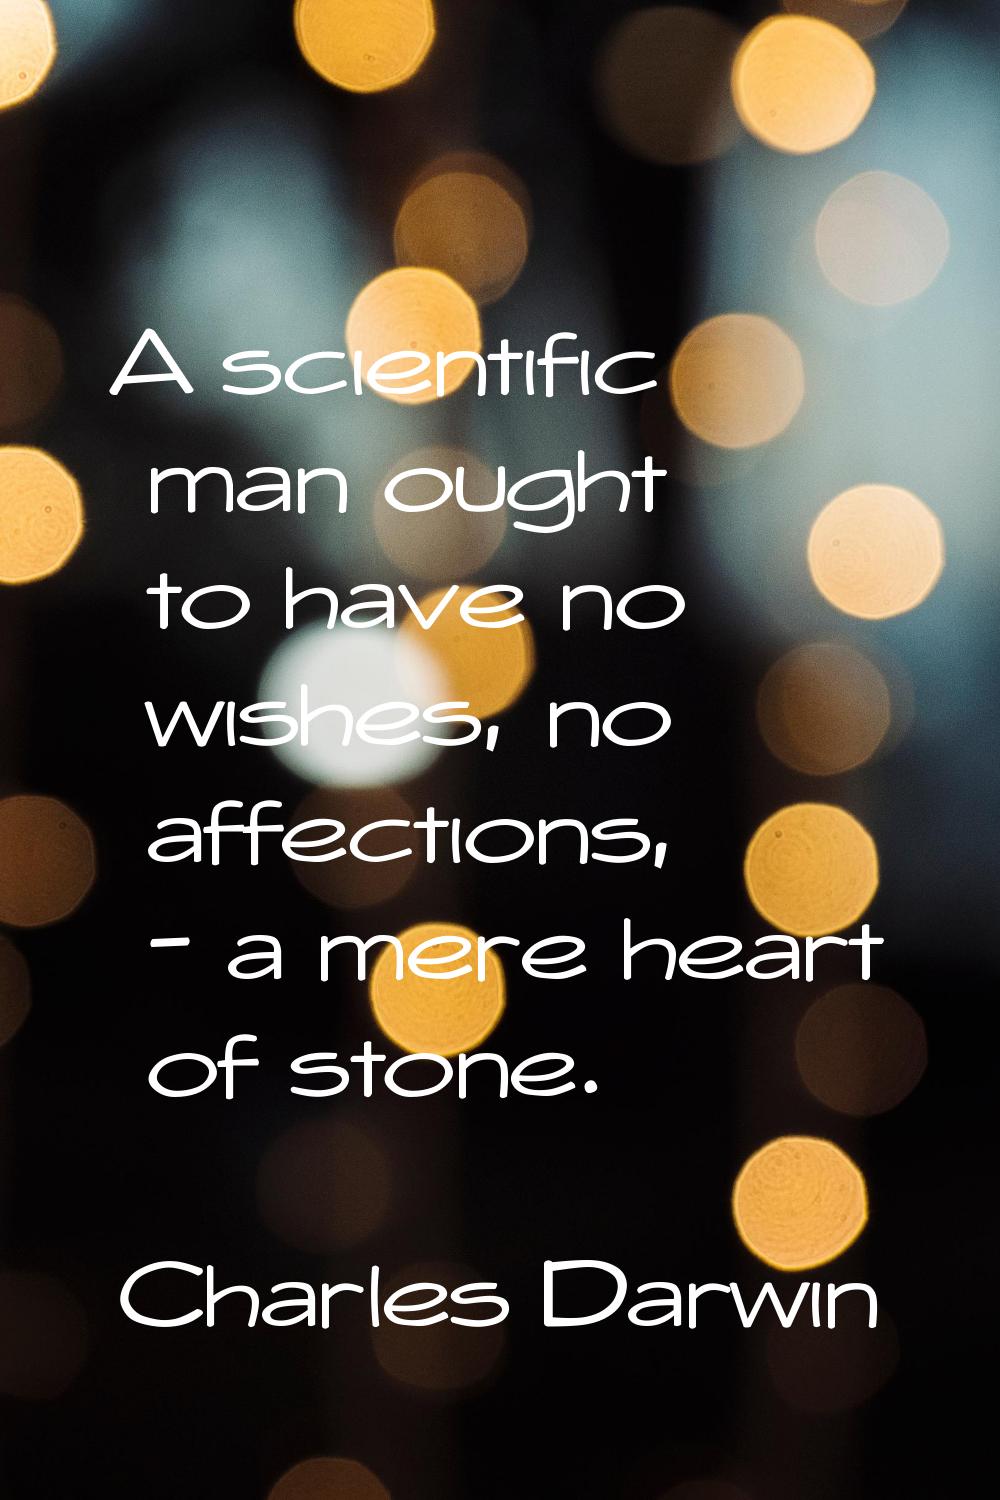 A scientific man ought to have no wishes, no affections, - a mere heart of stone.